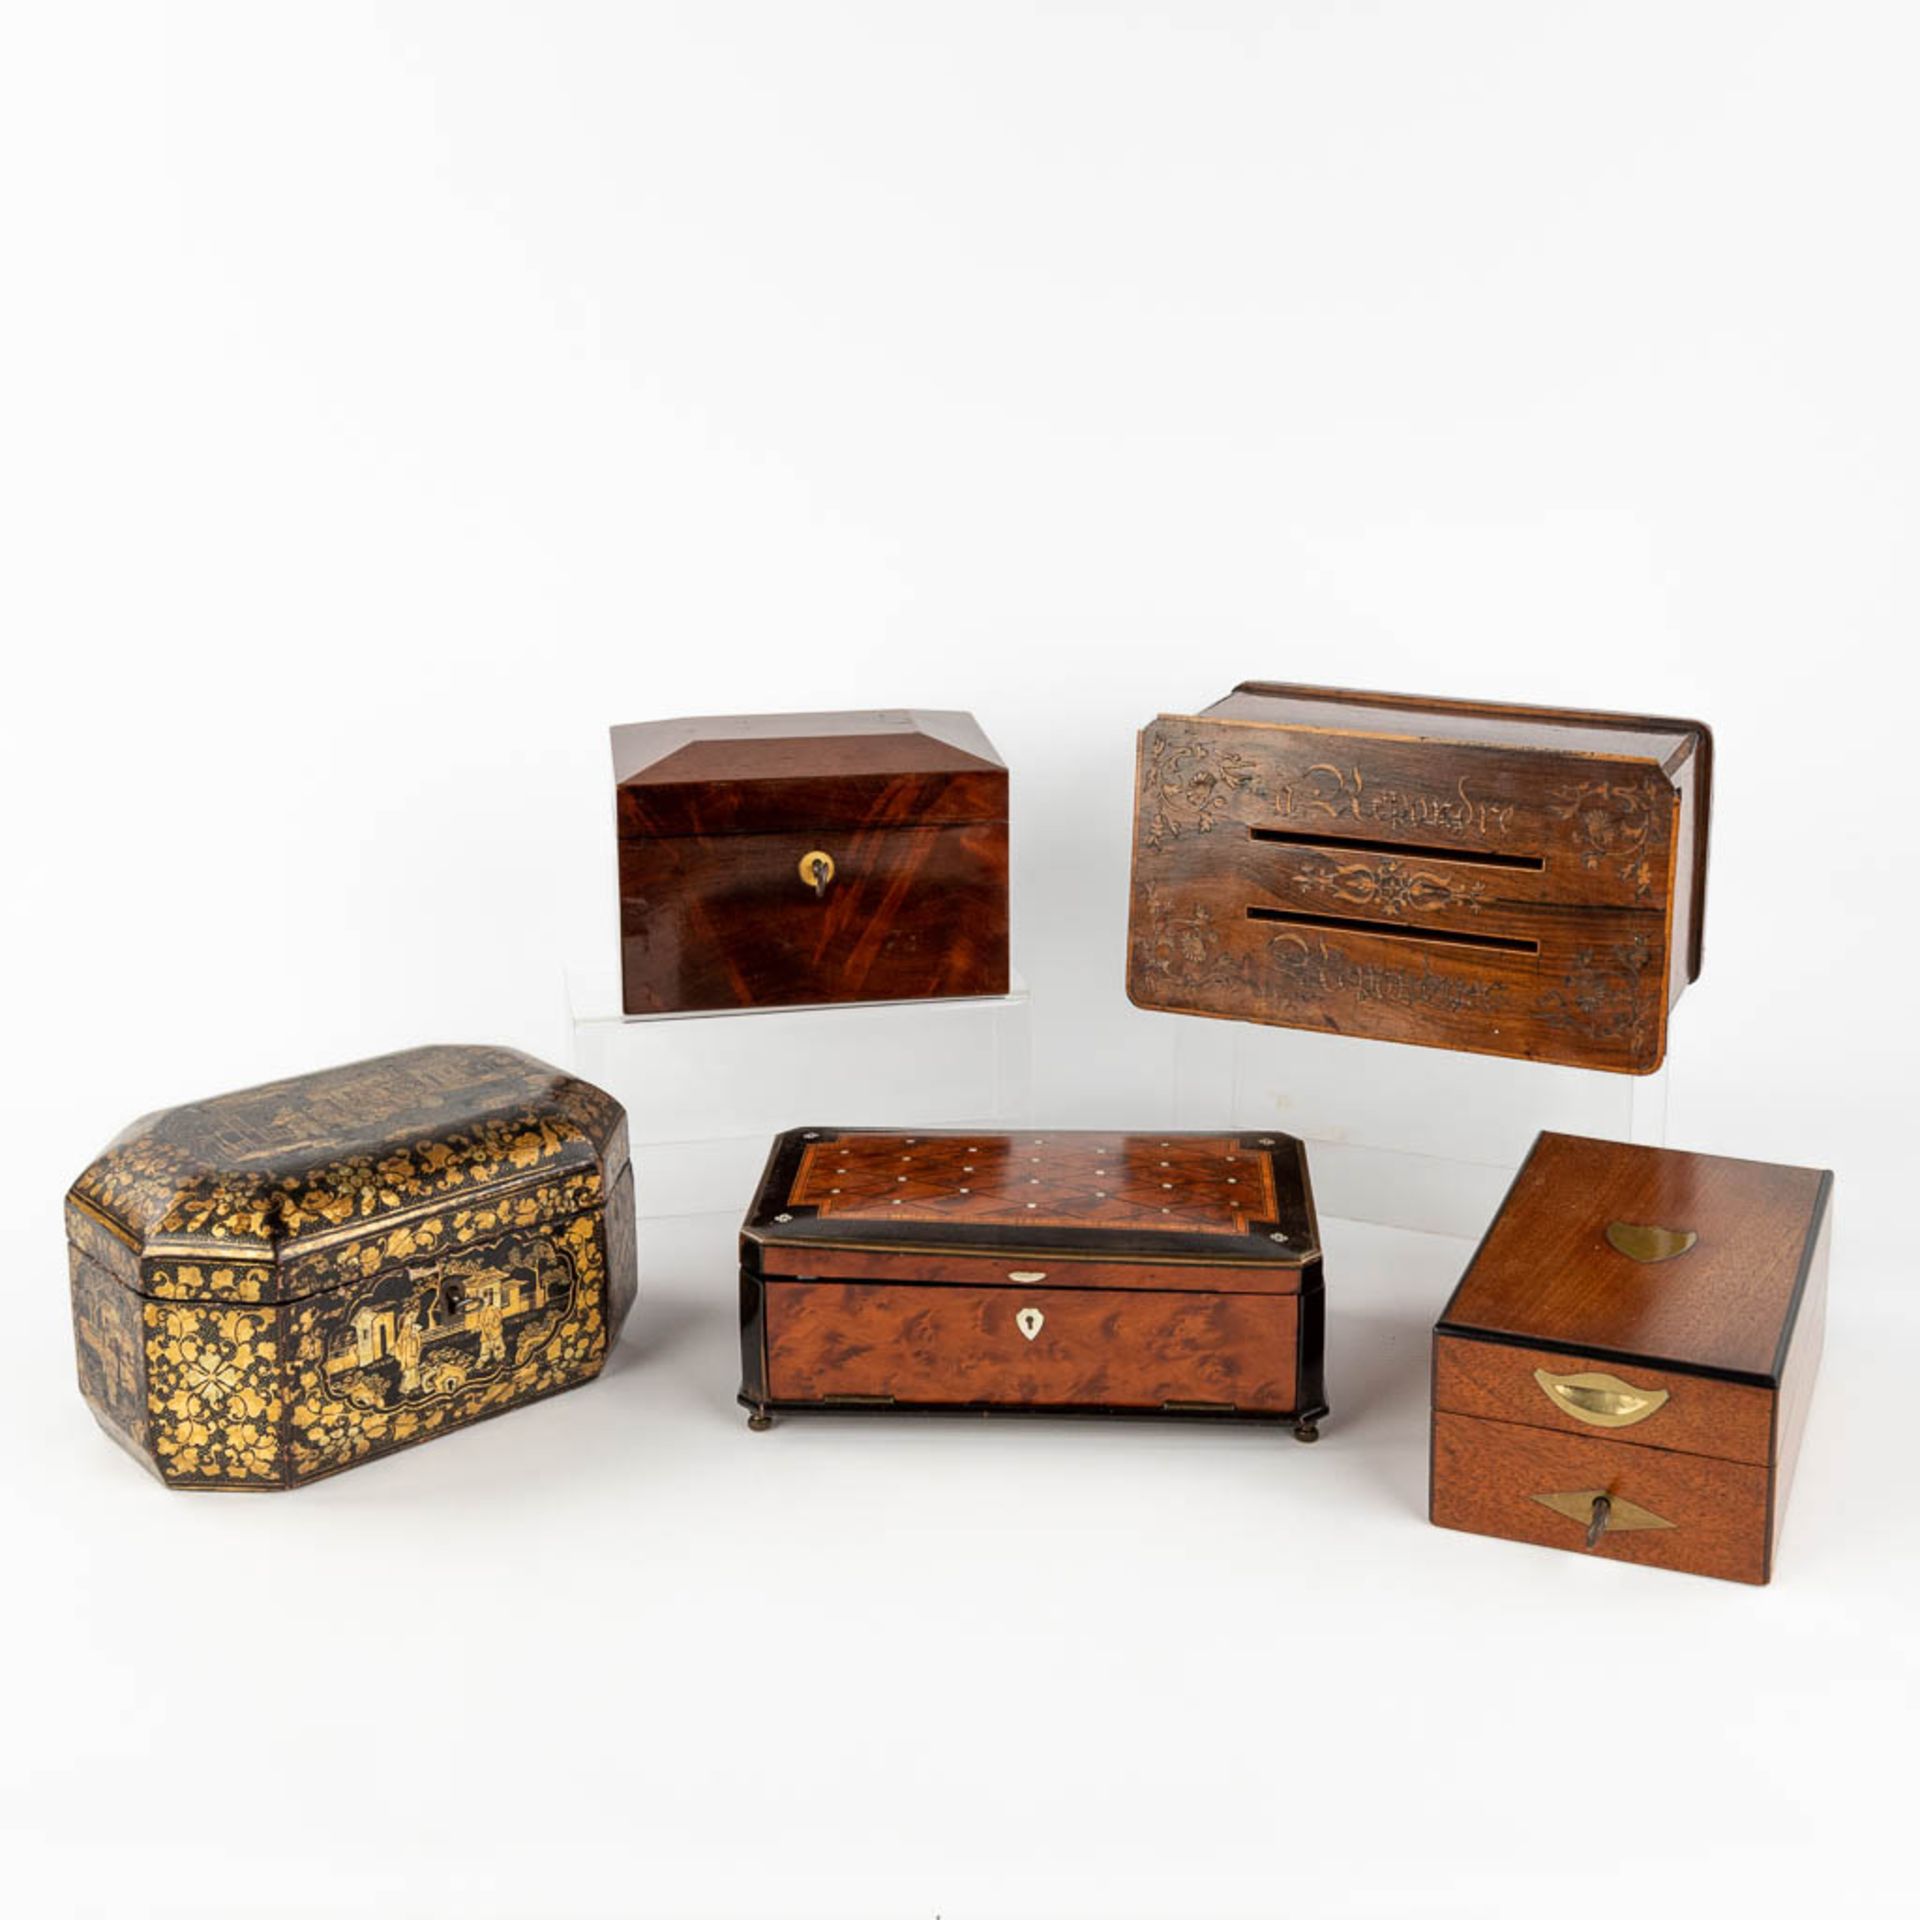 A collection of 5 antique storage boxes, 'Répondre and Répondues', Domino game and jewellery boxes.